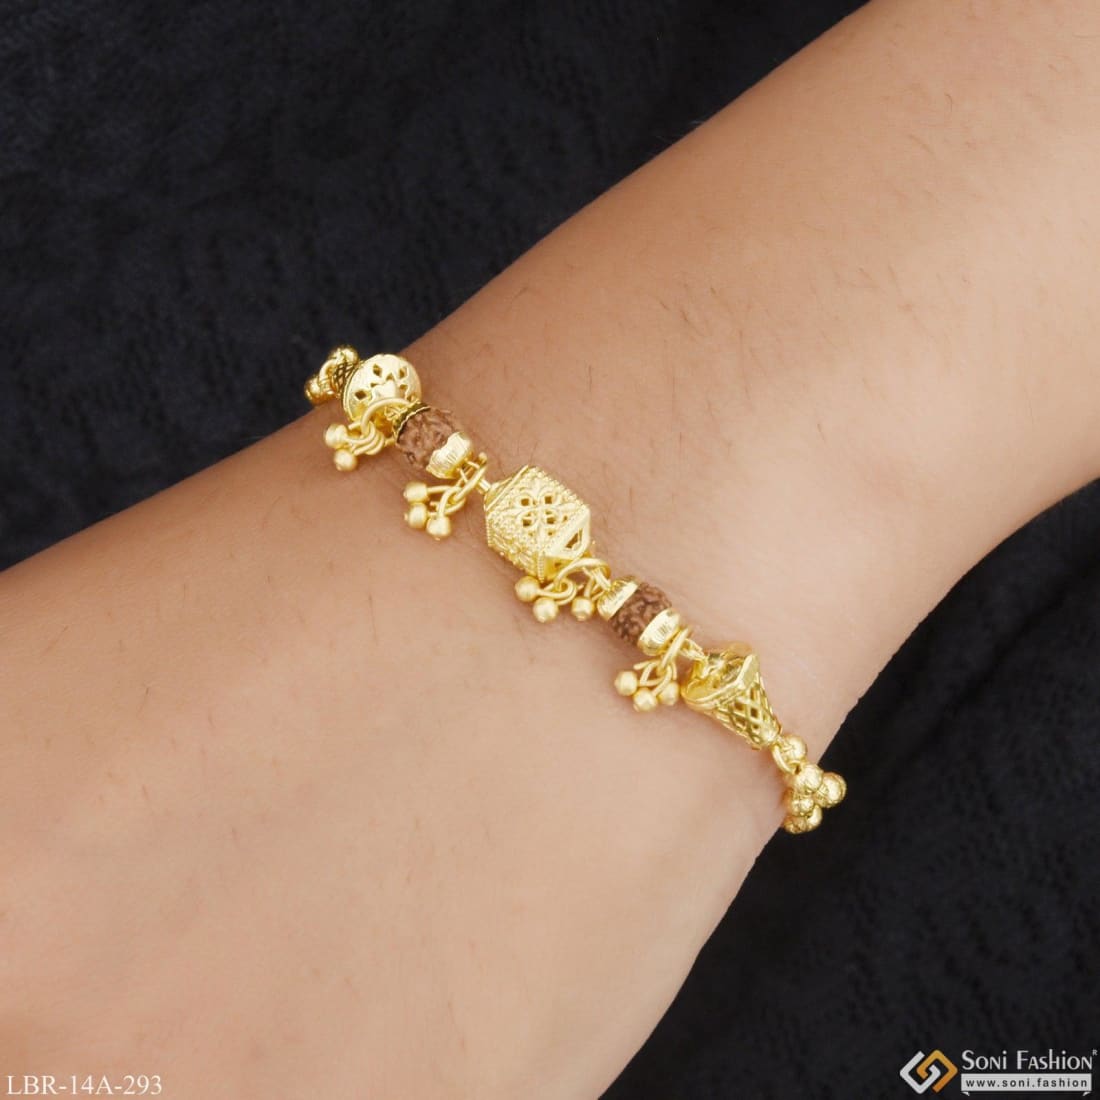 Stylish Bracelets for Every Occasion- Shop For Latest Trends Now